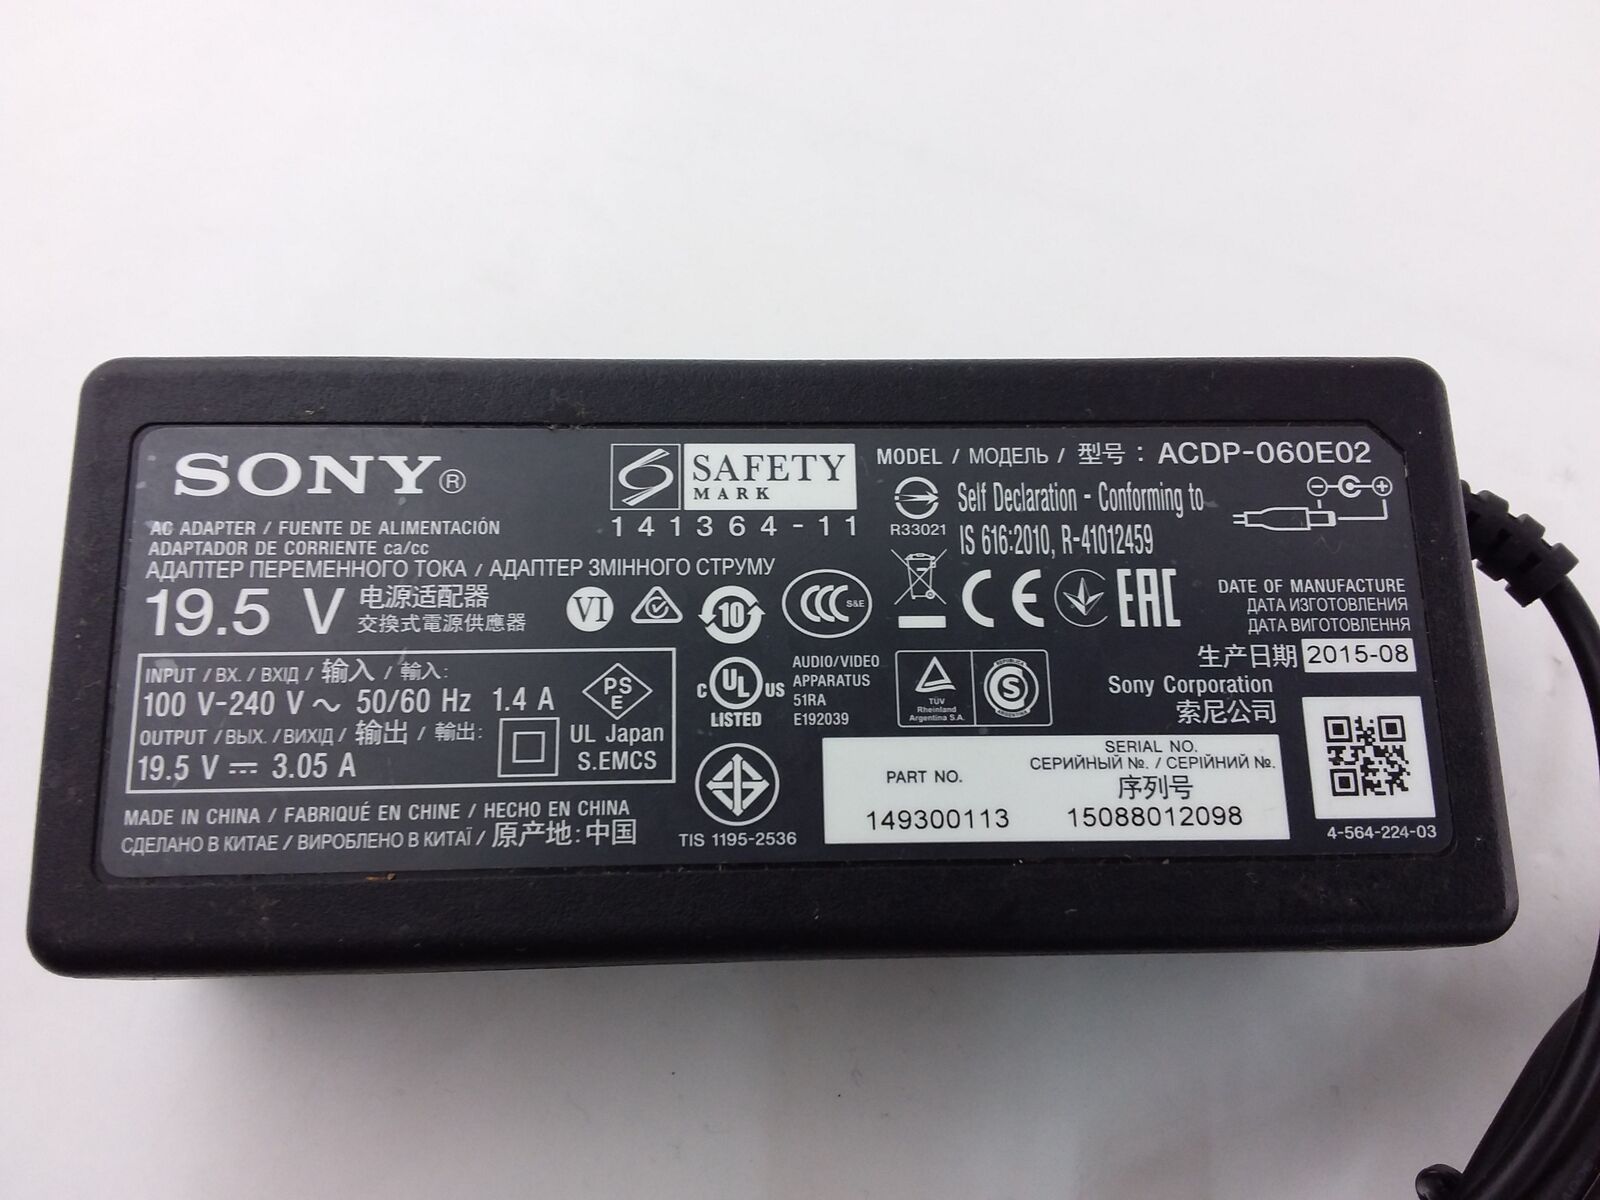 Original Sony ACDP-060E02 TV Power Adapter Cable Cord Box Brand: Sony MPN: ACD